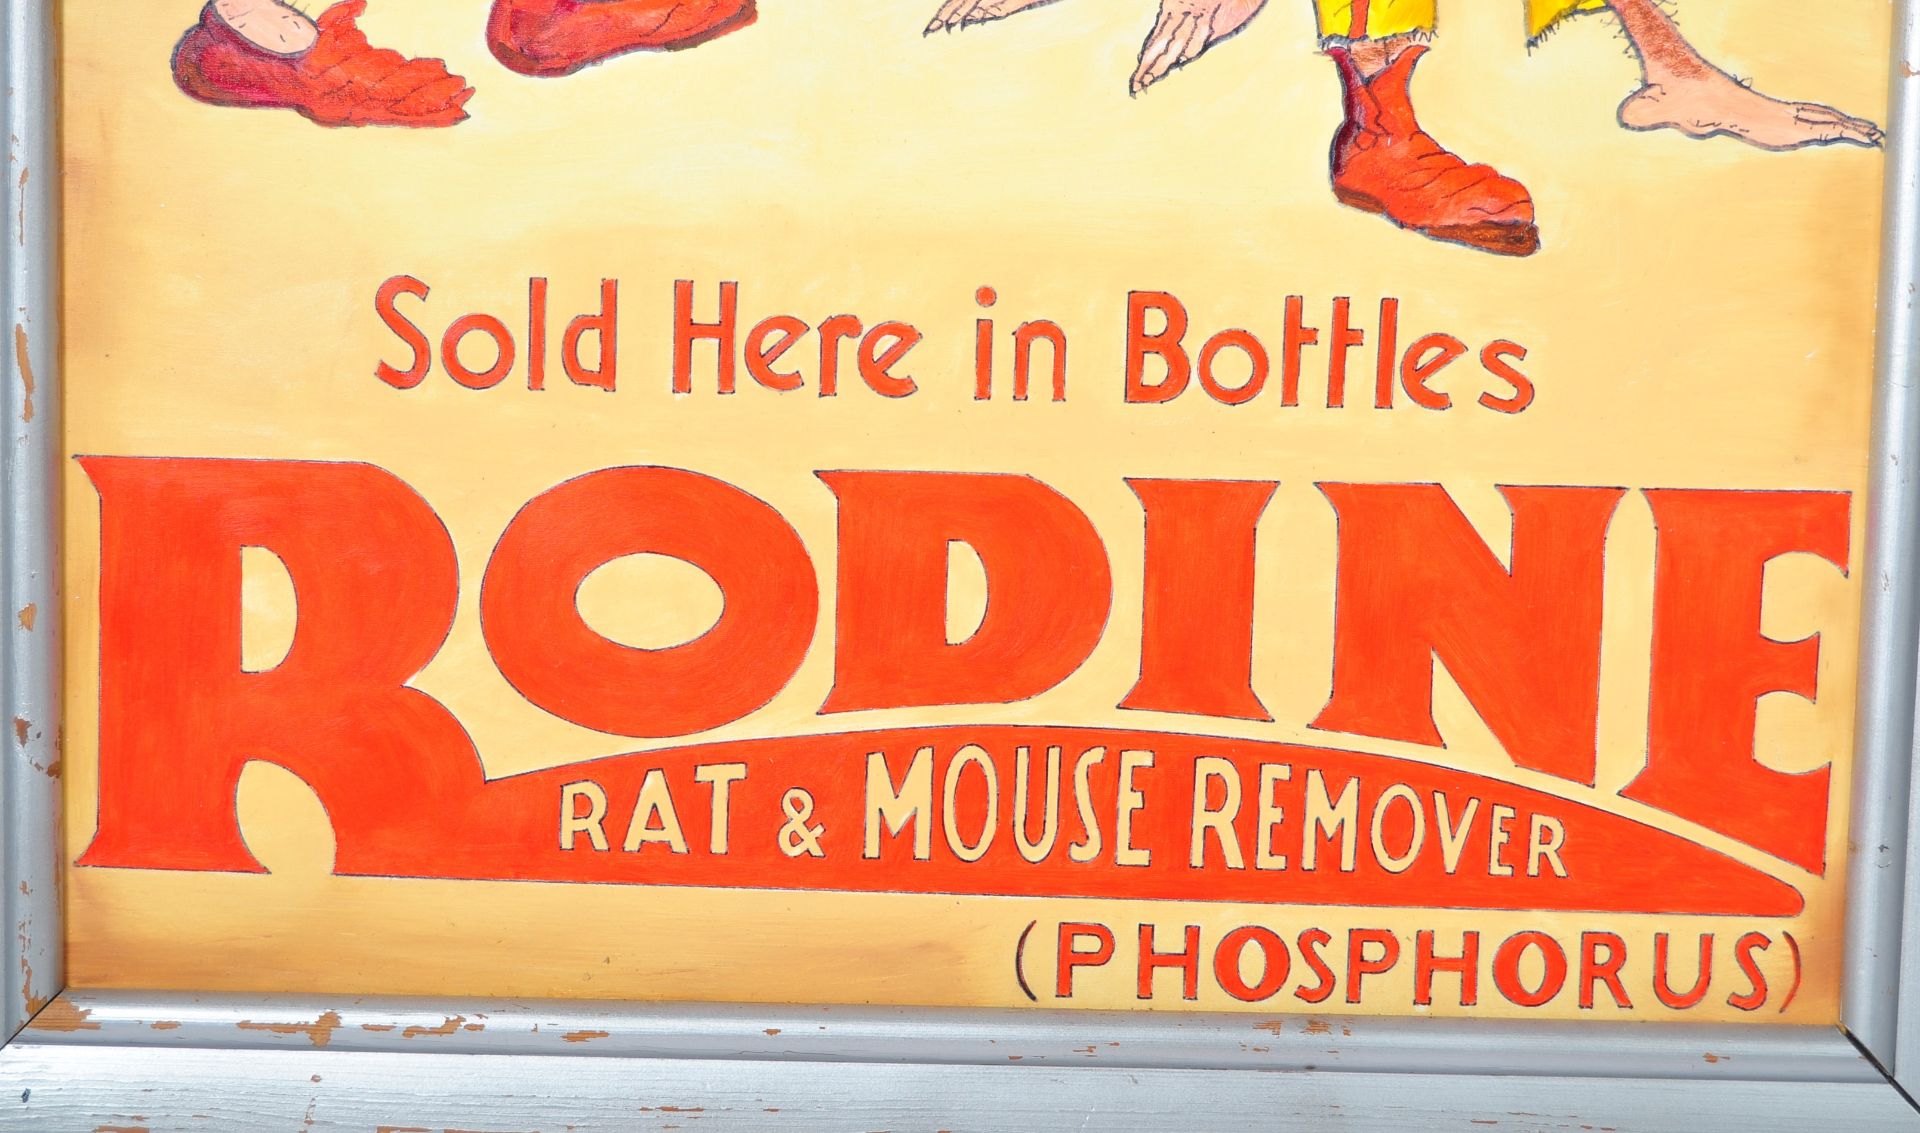 RODINE RAT AND MOUSE REMOVER OIL ON BOARD IMPRESSION OF A ENAMEL SIGN - Image 3 of 3